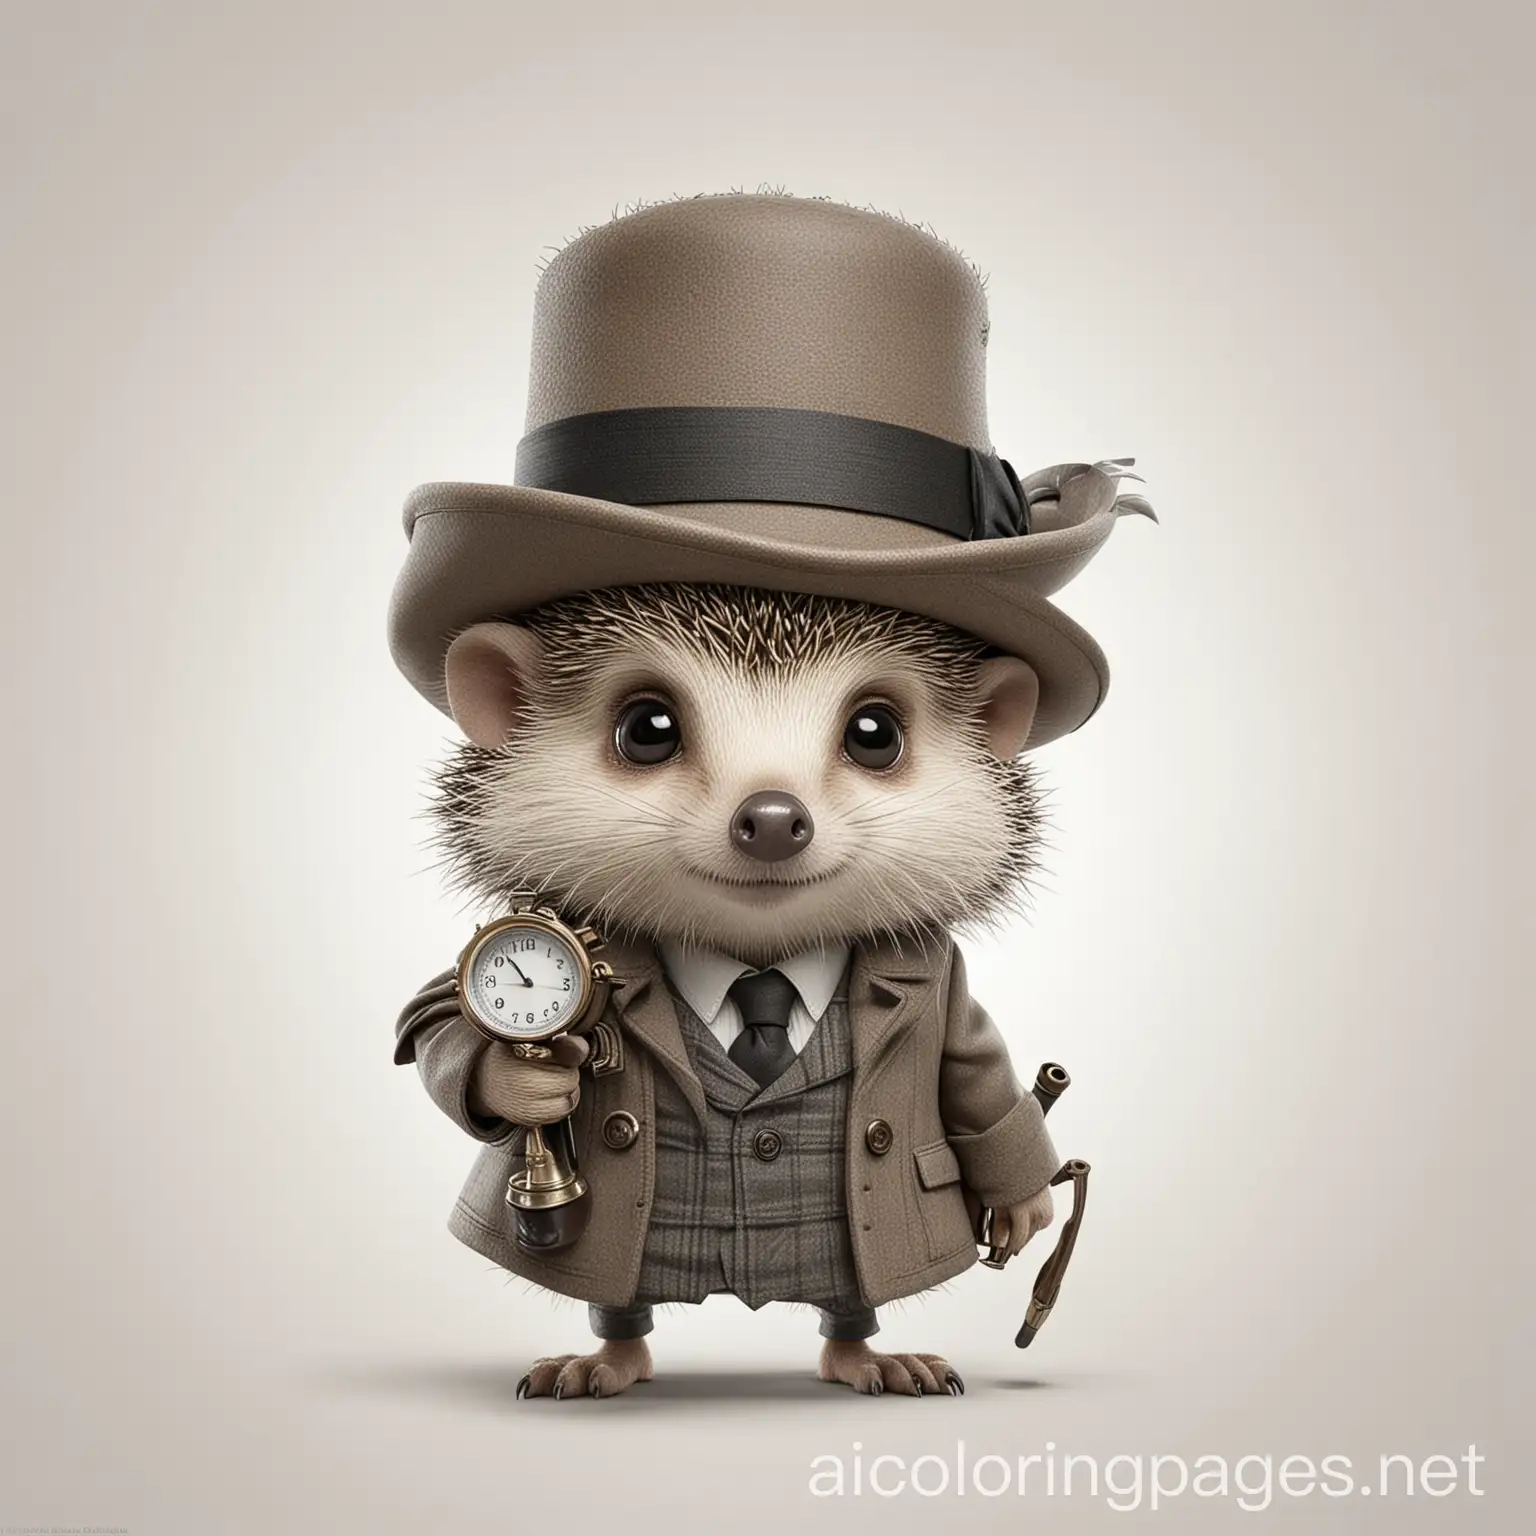 An adorable hedgehog detective dressed like Sherlock Holmes, large eyes, Coloring Page, black and white, line art, white background, Simplicity, Ample White Space. The background of the coloring page is plain white to make it easy for young children to color within the lines. The outlines of all the subjects are easy to distinguish, making it simple for kids to color without too much difficulty